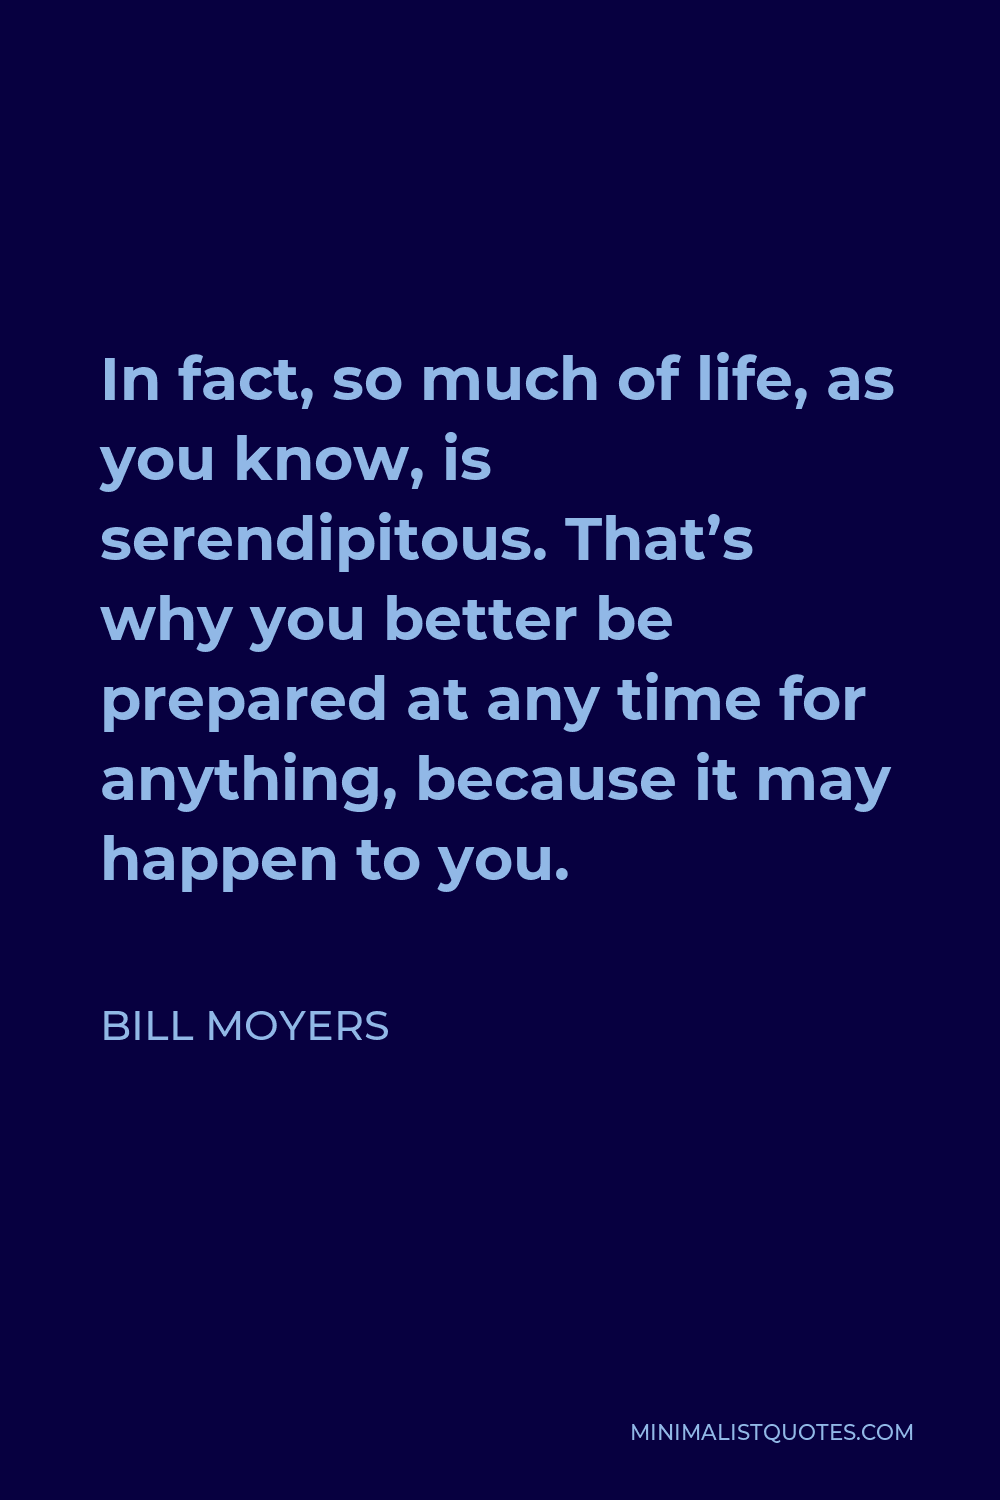 Bill Moyers Quote - In fact, so much of life, as you know, is serendipitous. That’s why you better be prepared at any time for anything, because it may happen to you.